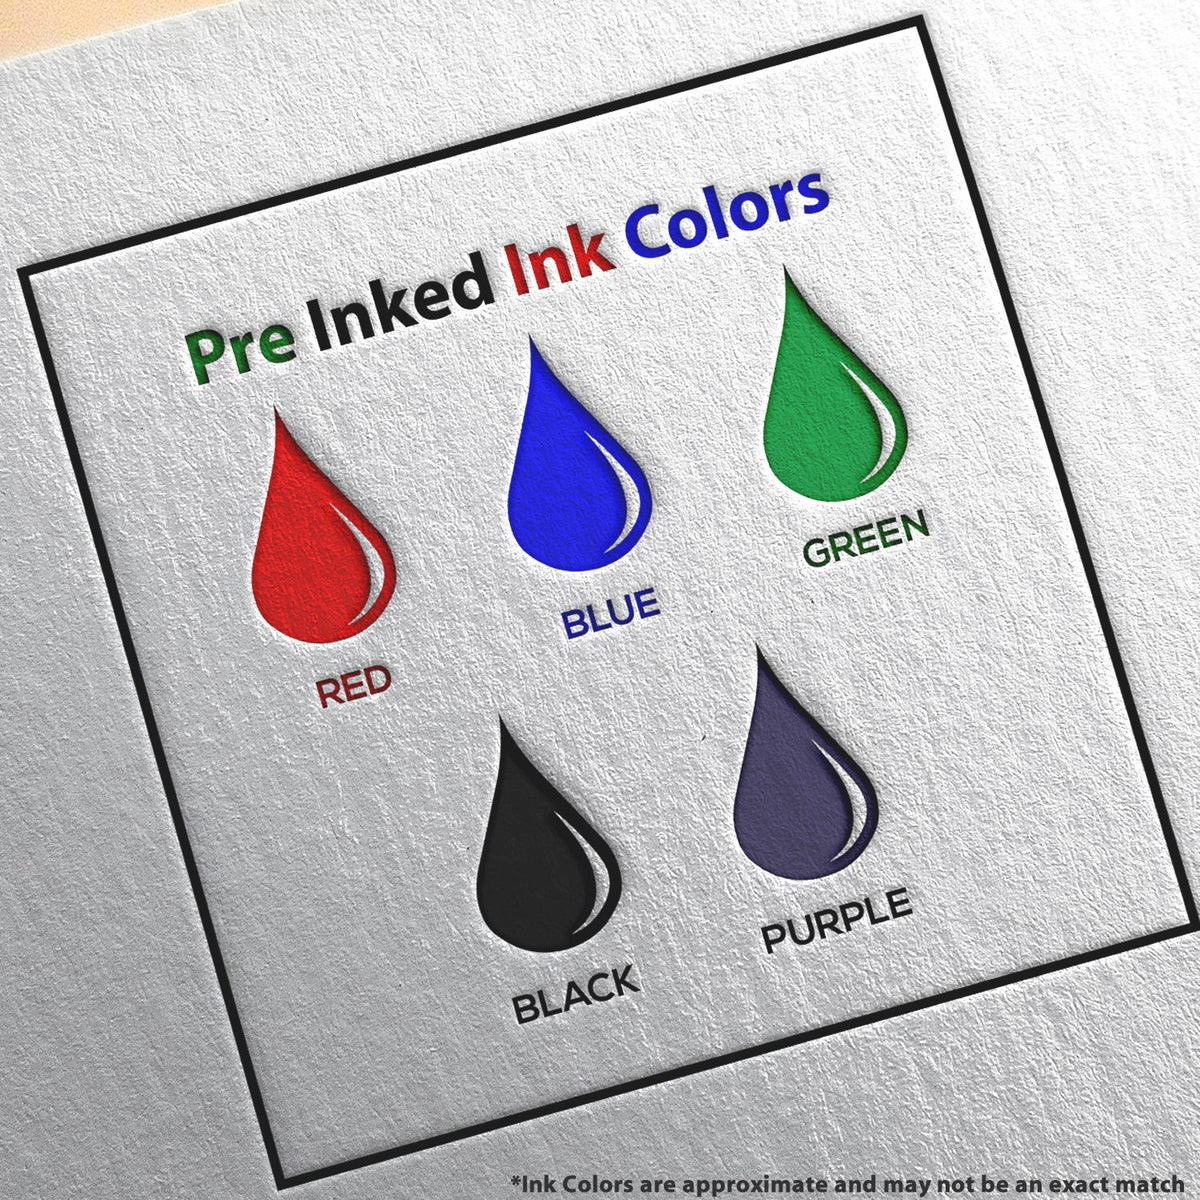 A picture showing the different ink colors or hues available for the Premium MaxLight Pre-Inked Pennsylvania Engineering Stamp product.